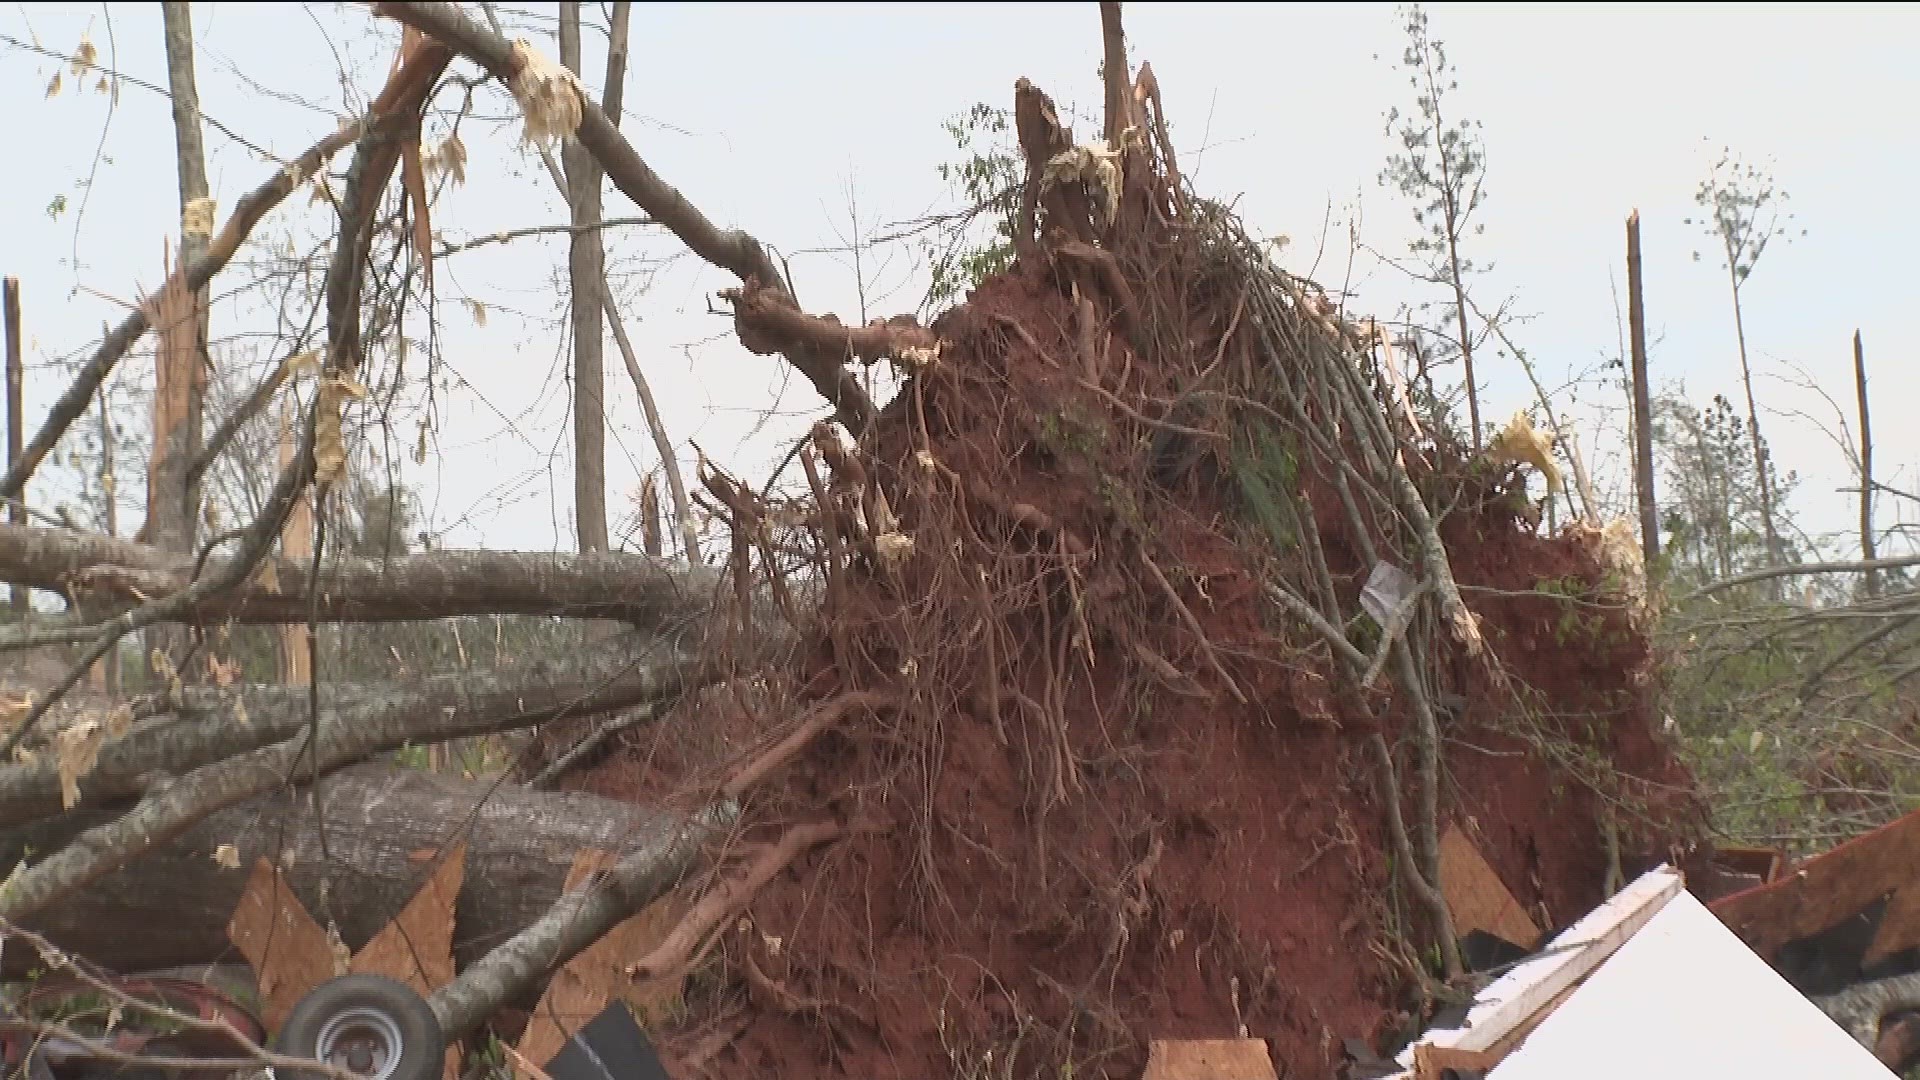 Gov. Kemp confirmed that an EF-3 tornado hit the area Sunday morning.